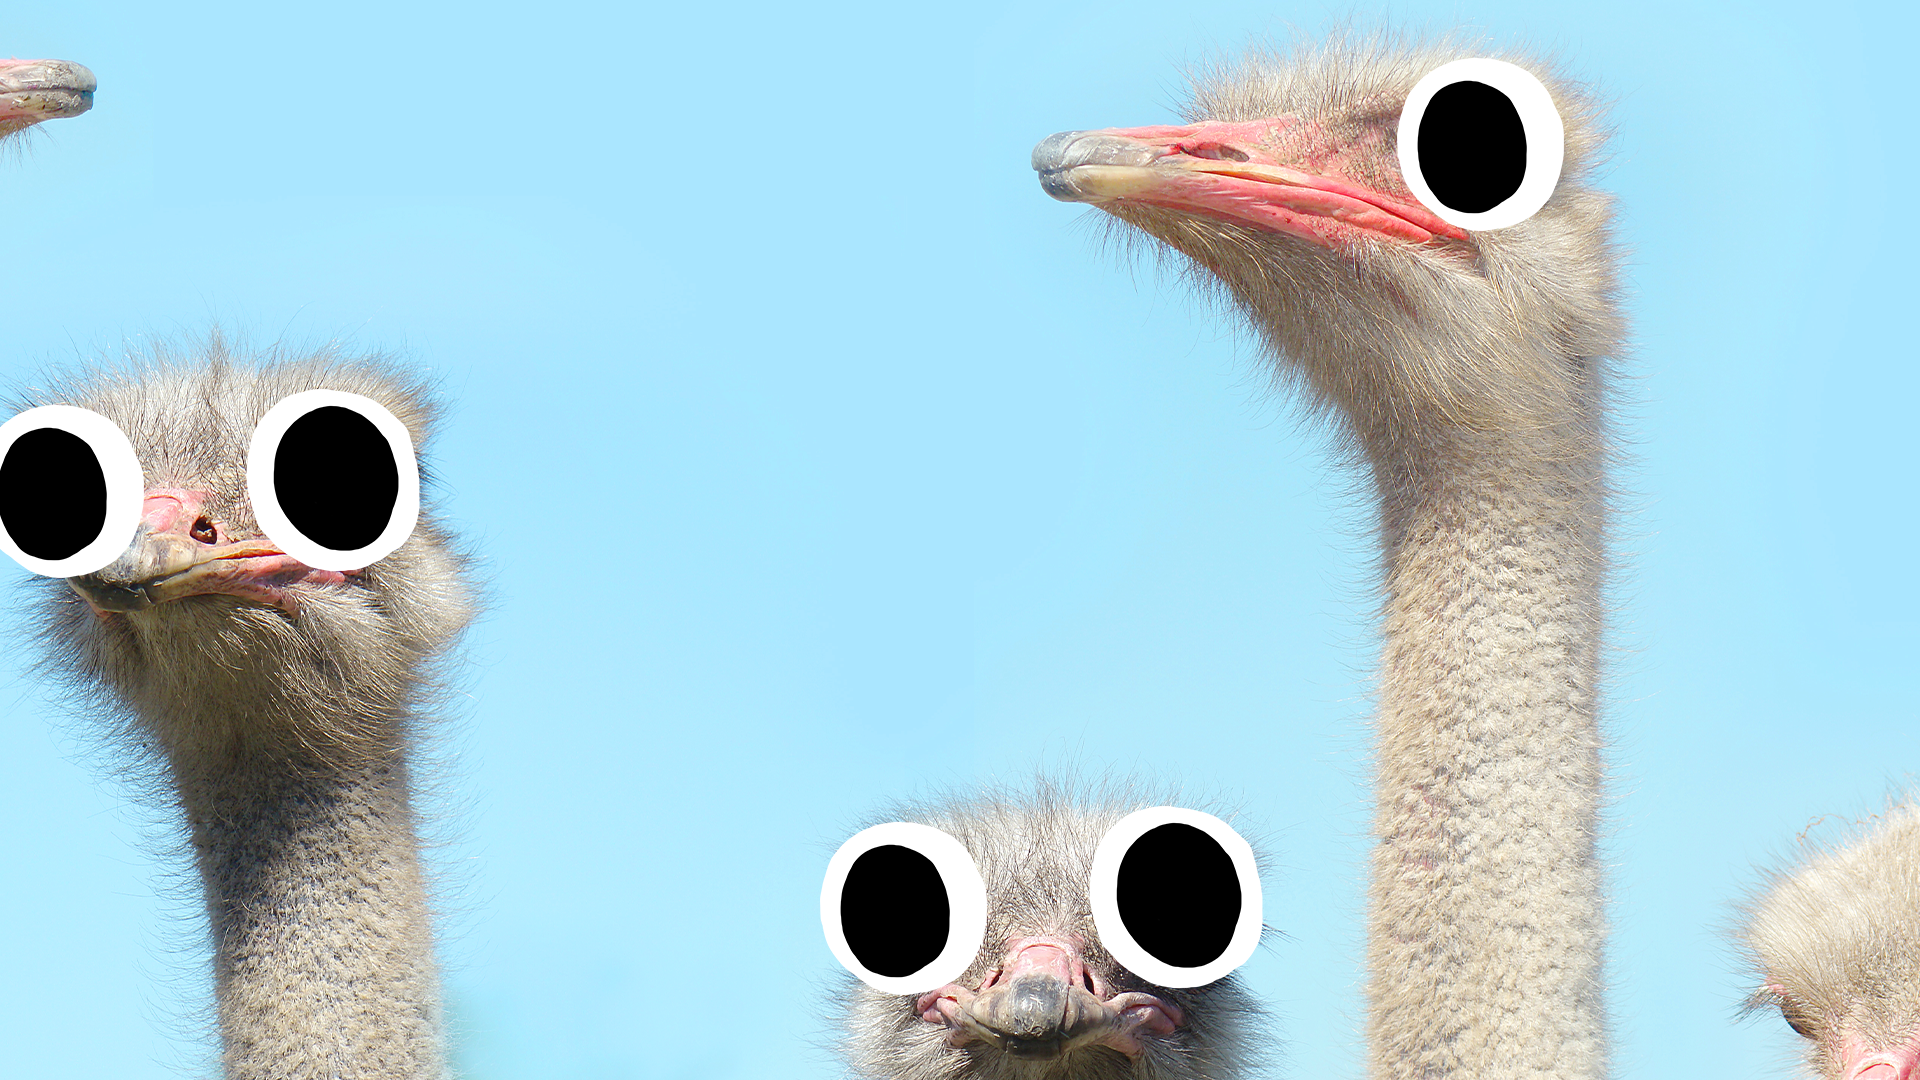 Goofy looking ostriches 